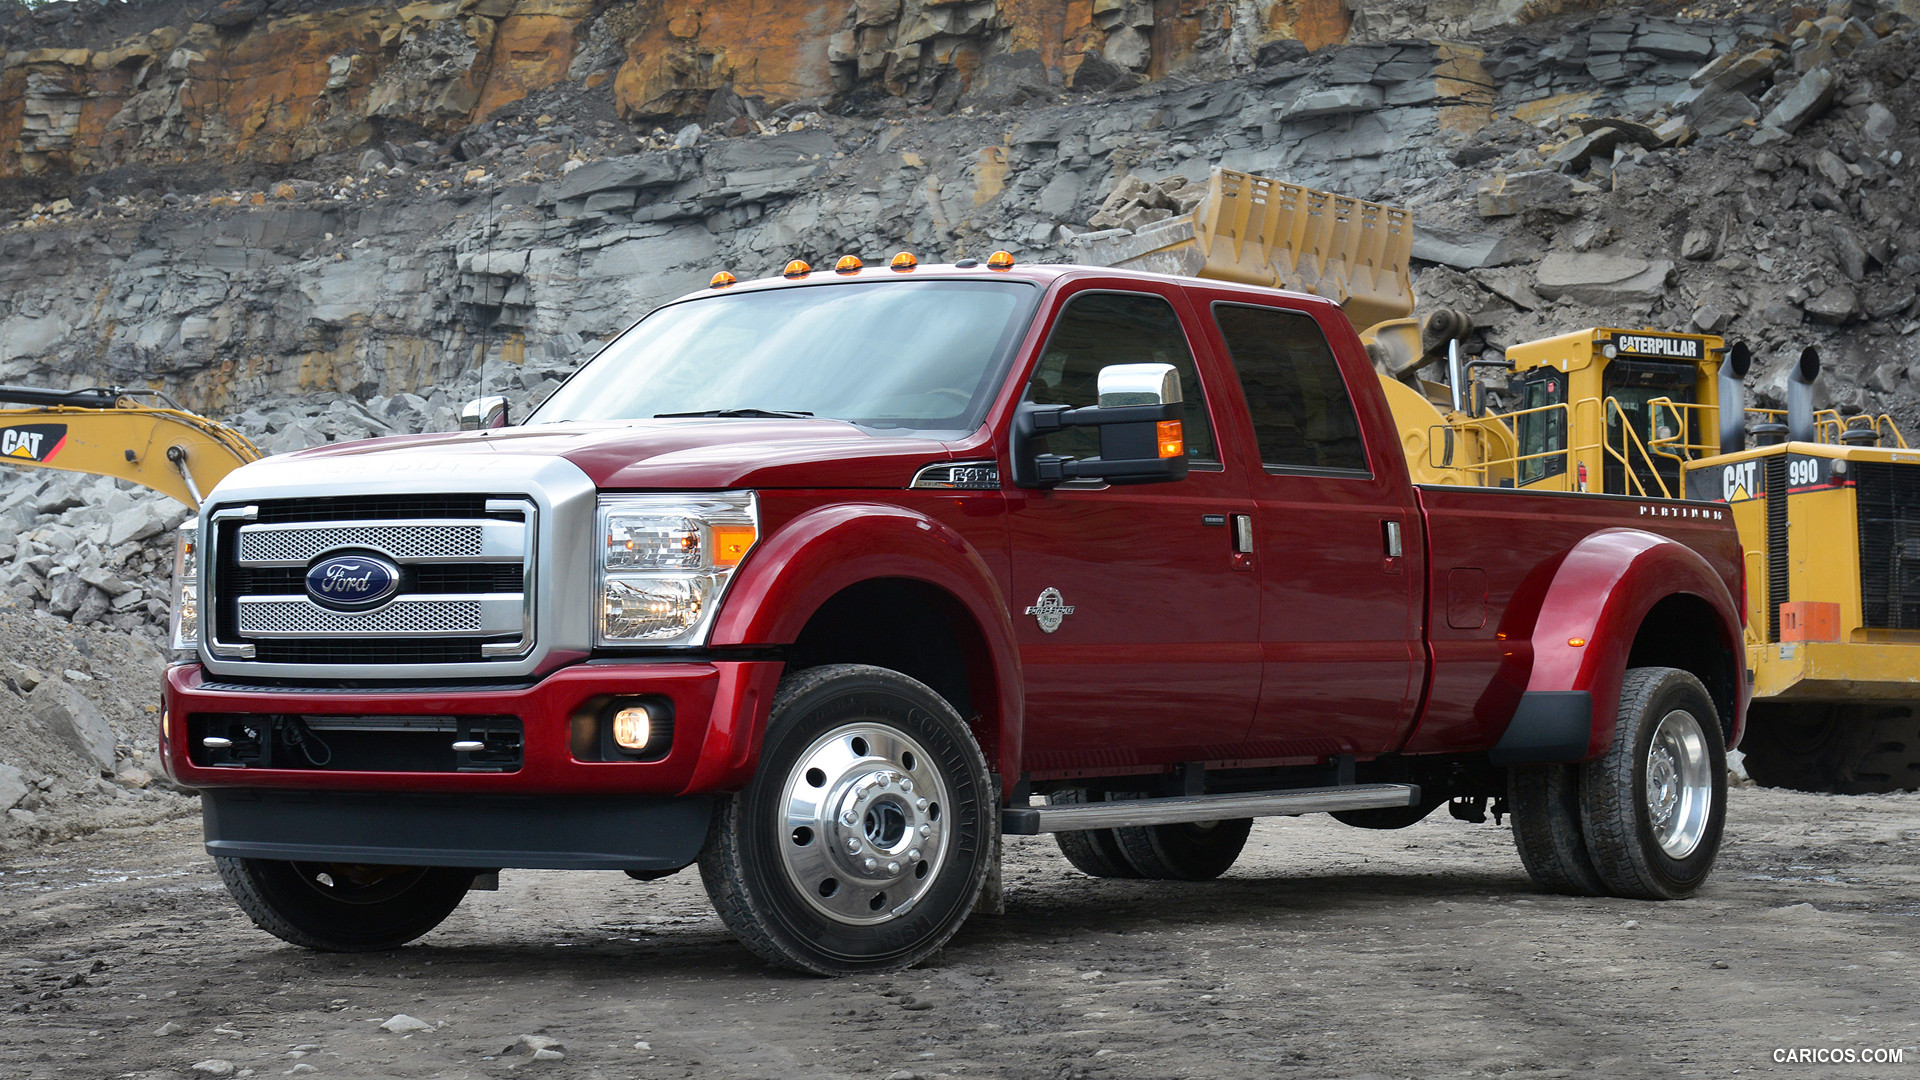 2015 Ford F-Series Super Duty Backgrounds on Wallpapers Vista